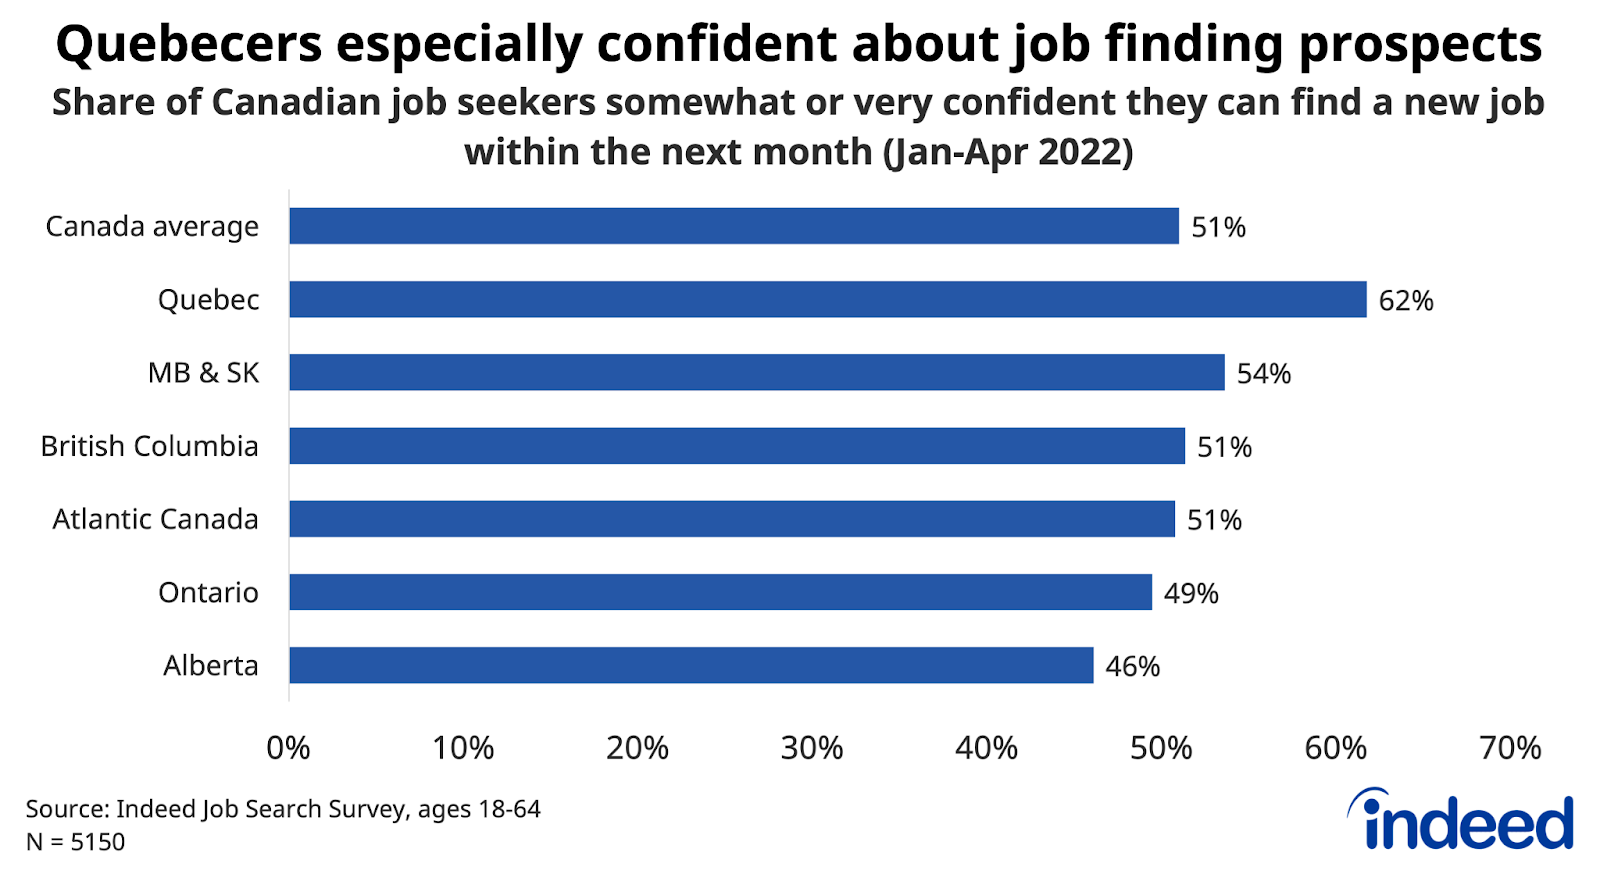 Bar chart titled “Quebecers especially confident about job finding prospects.”